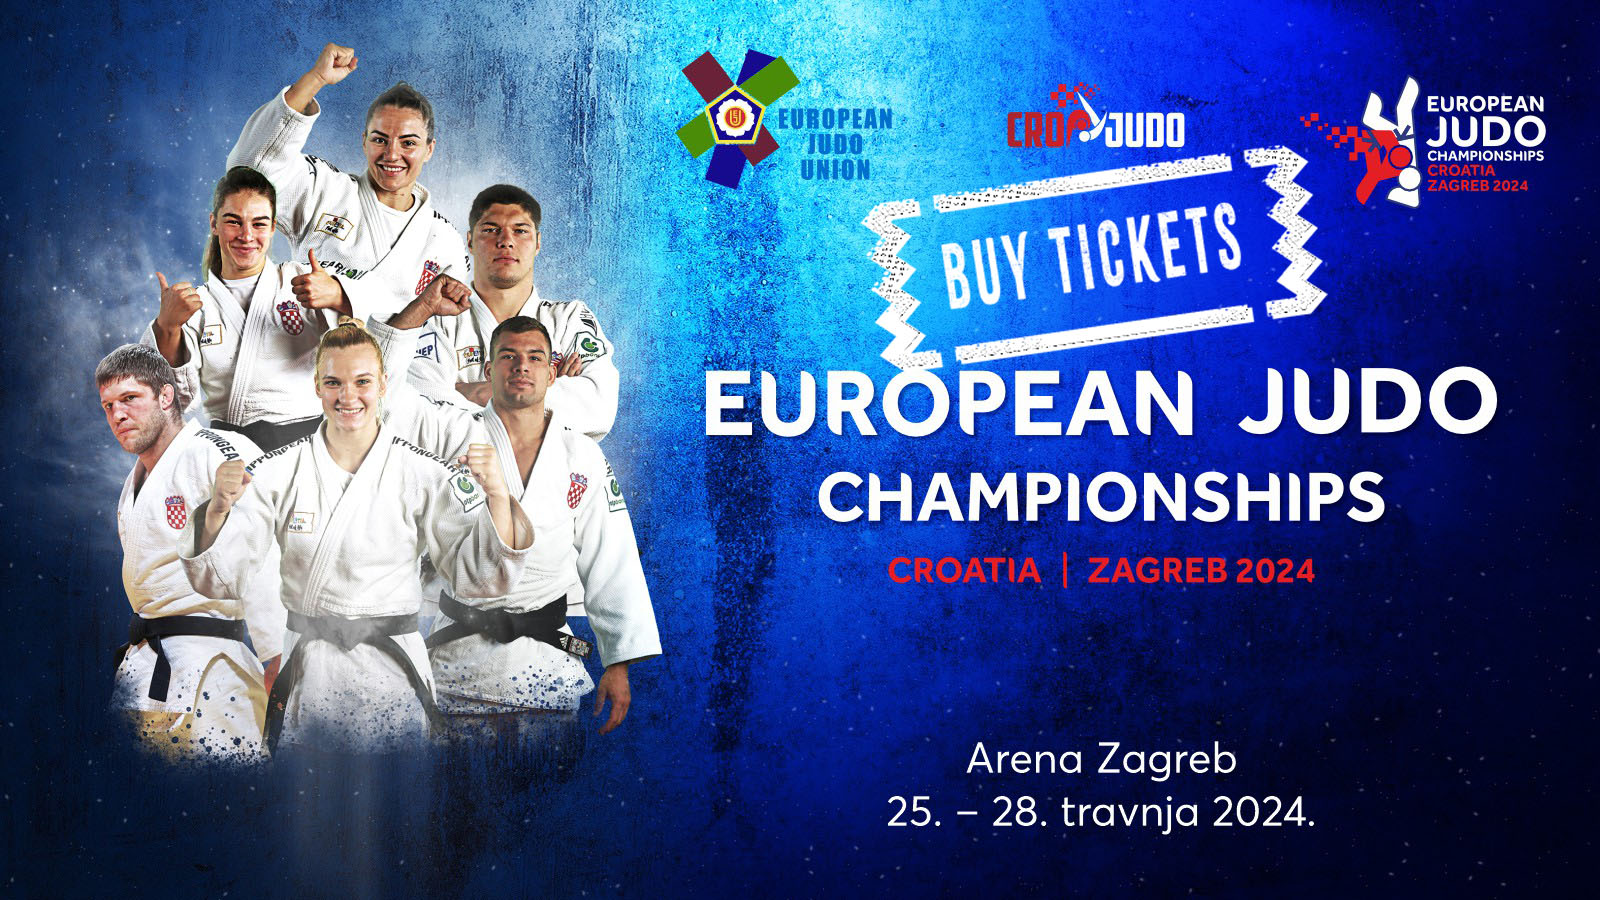 EURO 2024 ZAGREB TICKETS ARE AVAILABLE NOW 